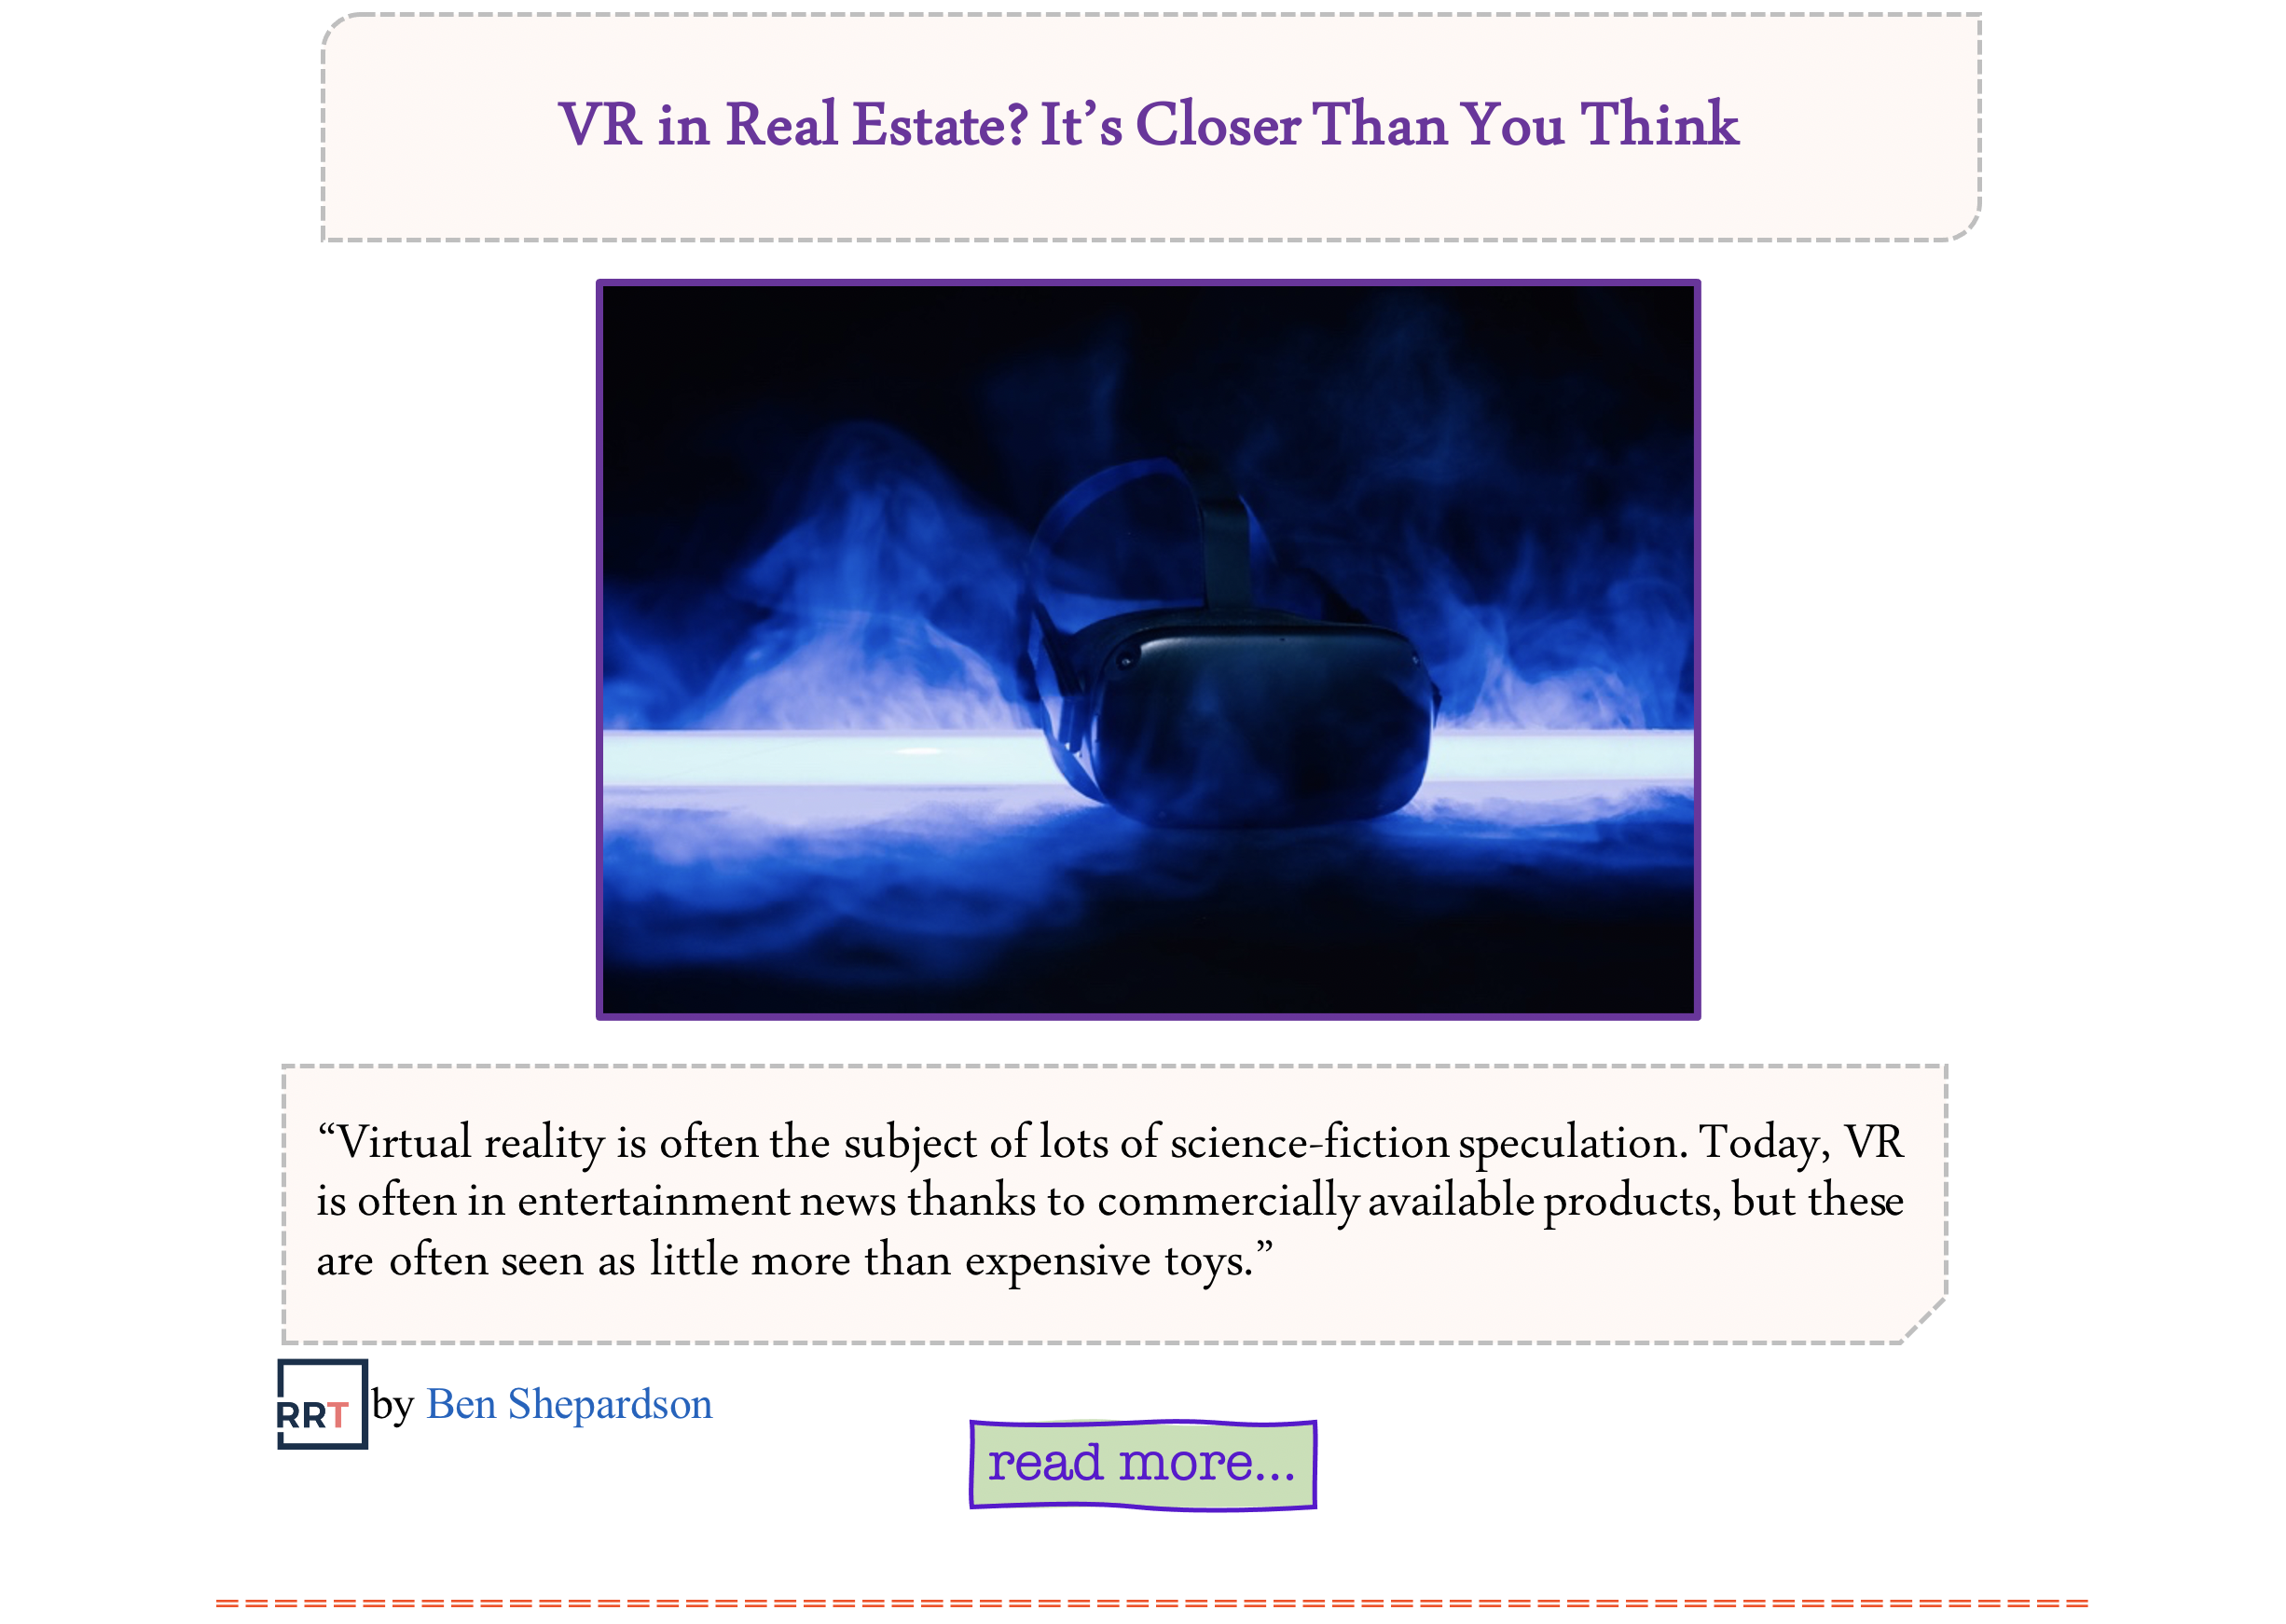 IS VIRTUAL REALTY IN THE FUTURE OF REAL ESTATE